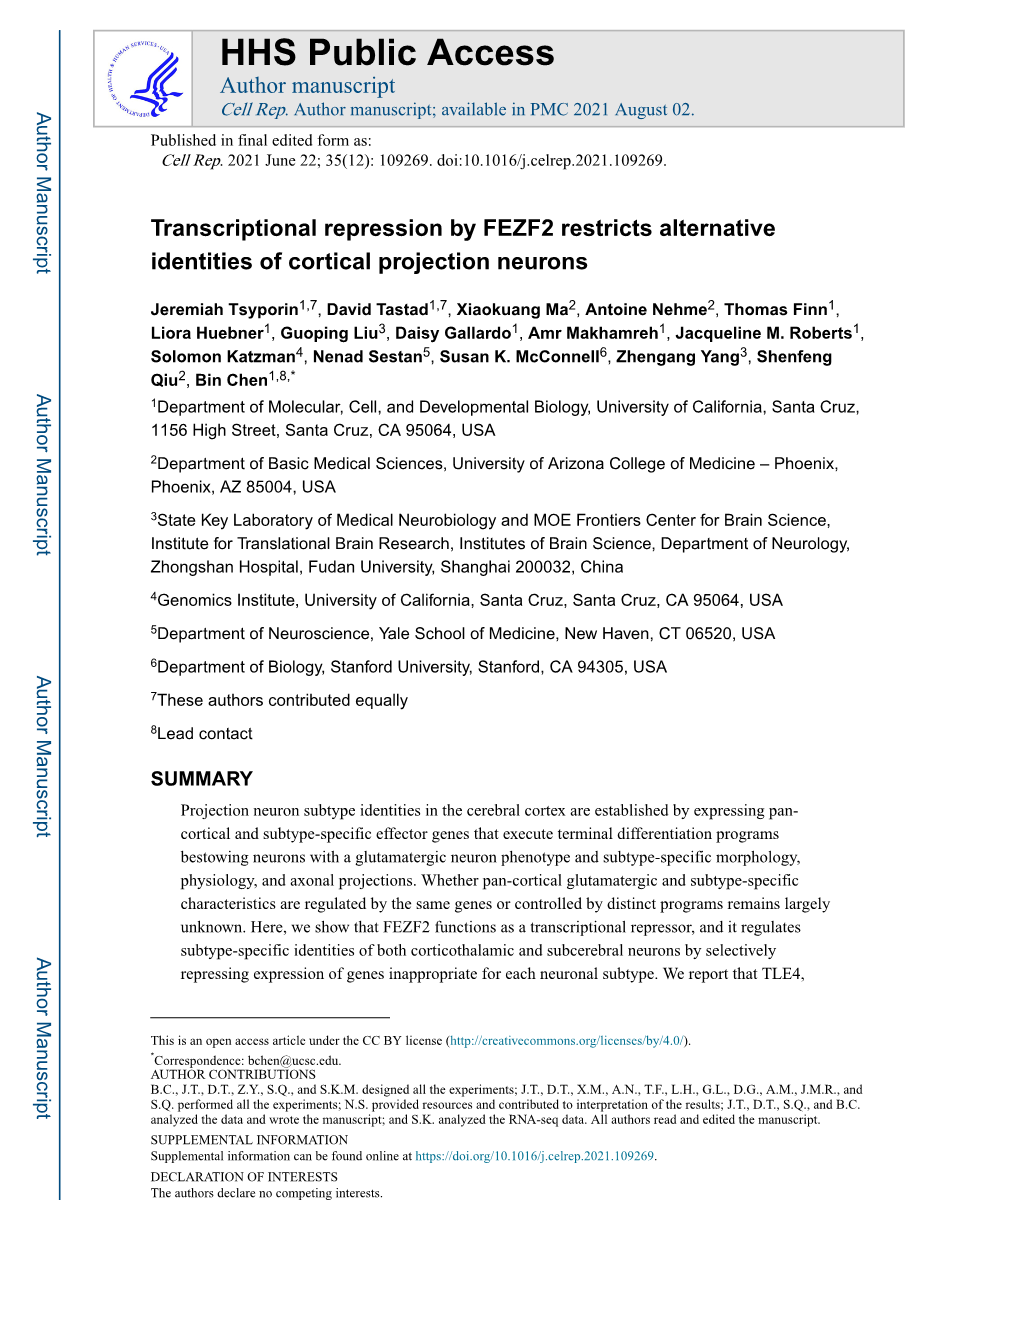 Transcriptional Repression by FEZF2 Restricts Alternative Identities of Cortical Projection Neurons